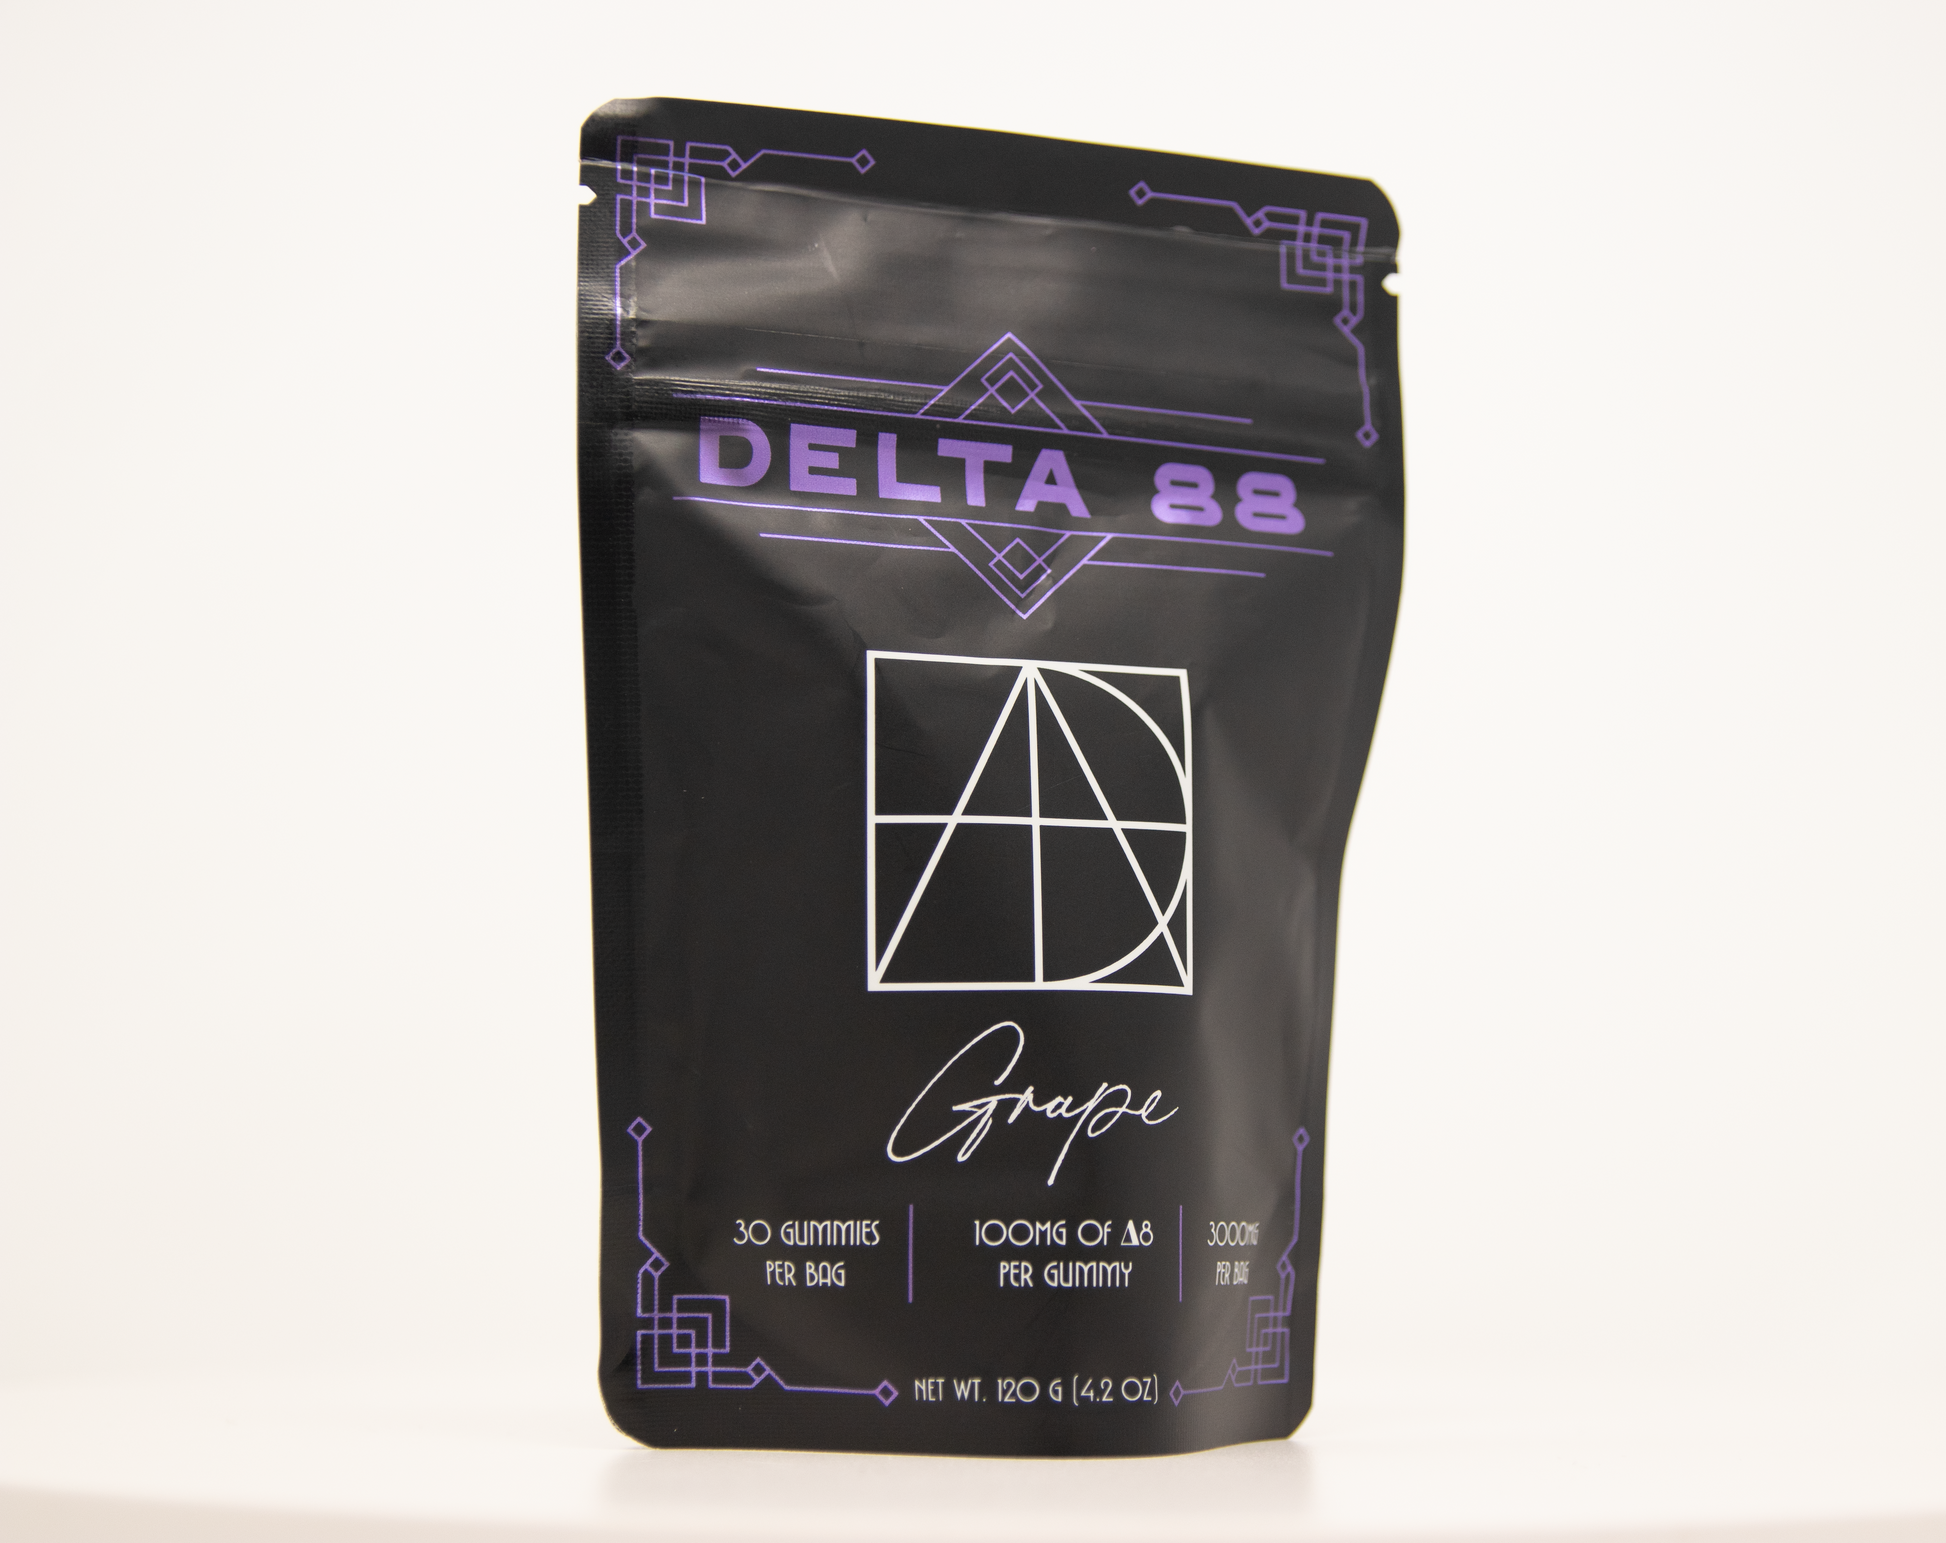 Delta 88 Grape flavored gummies that are 100mg per gummy with 30 count per bag.